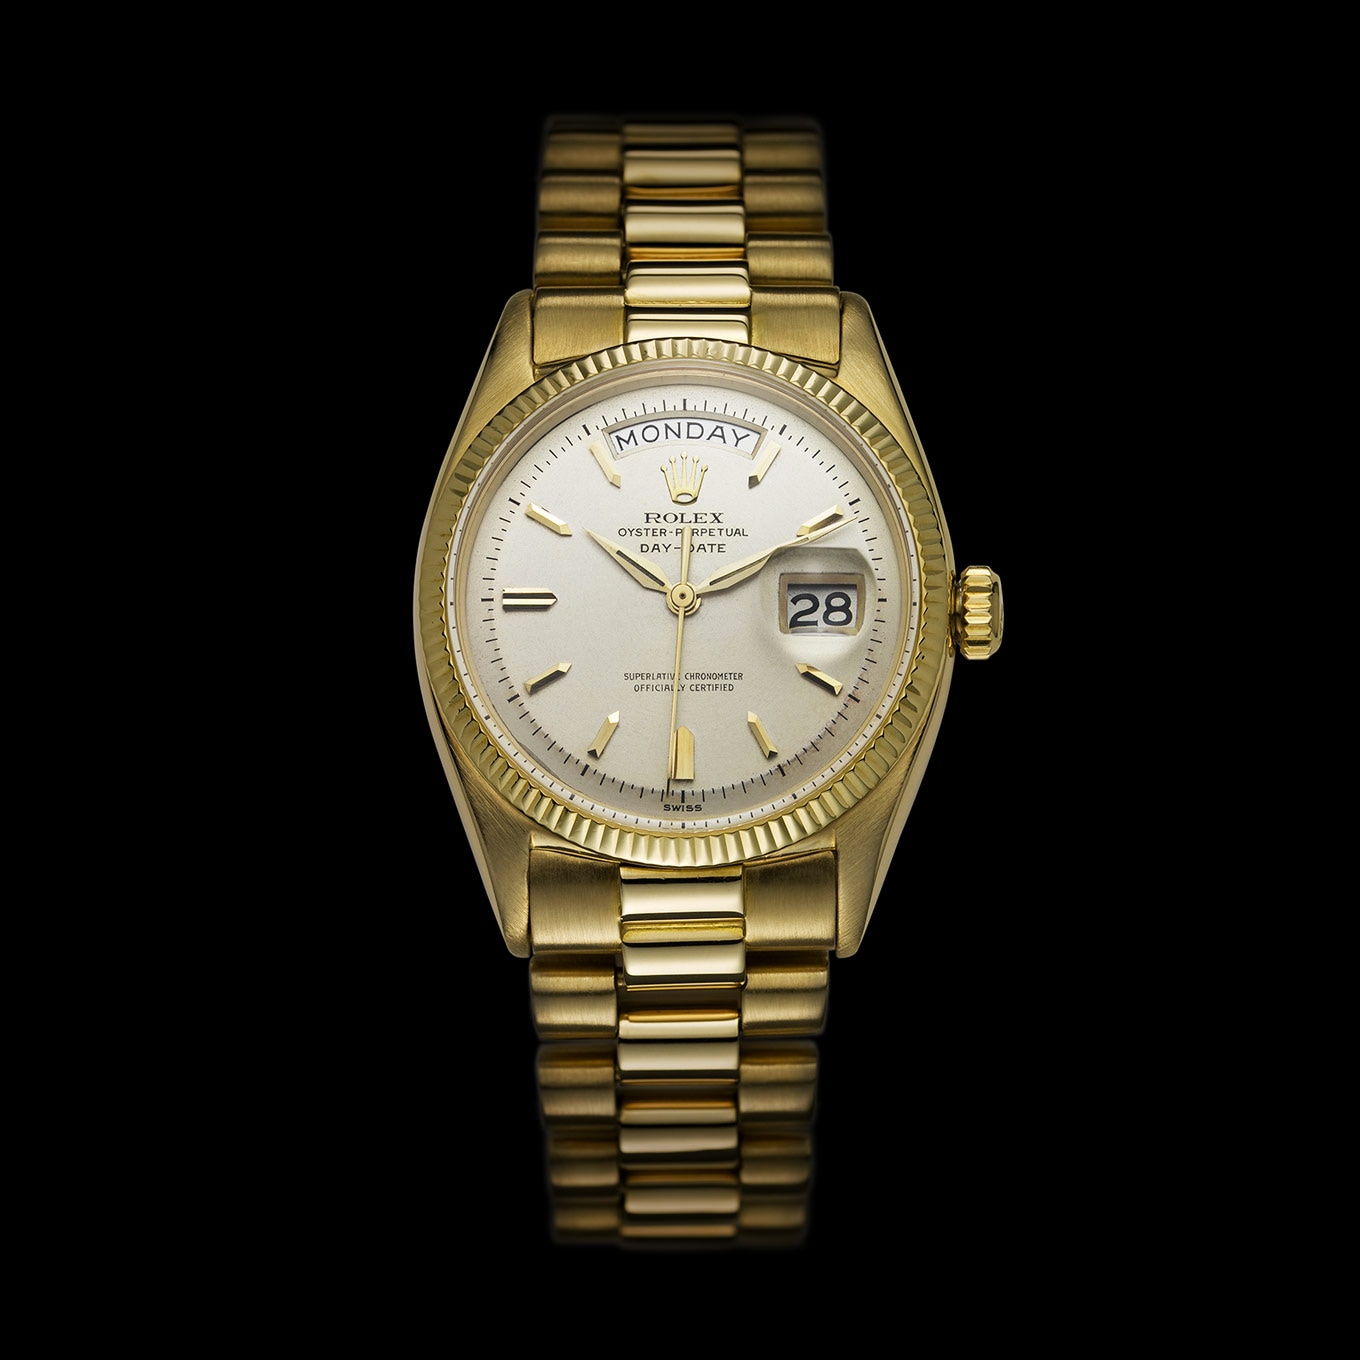 Rolex Watches History: 1953–1967